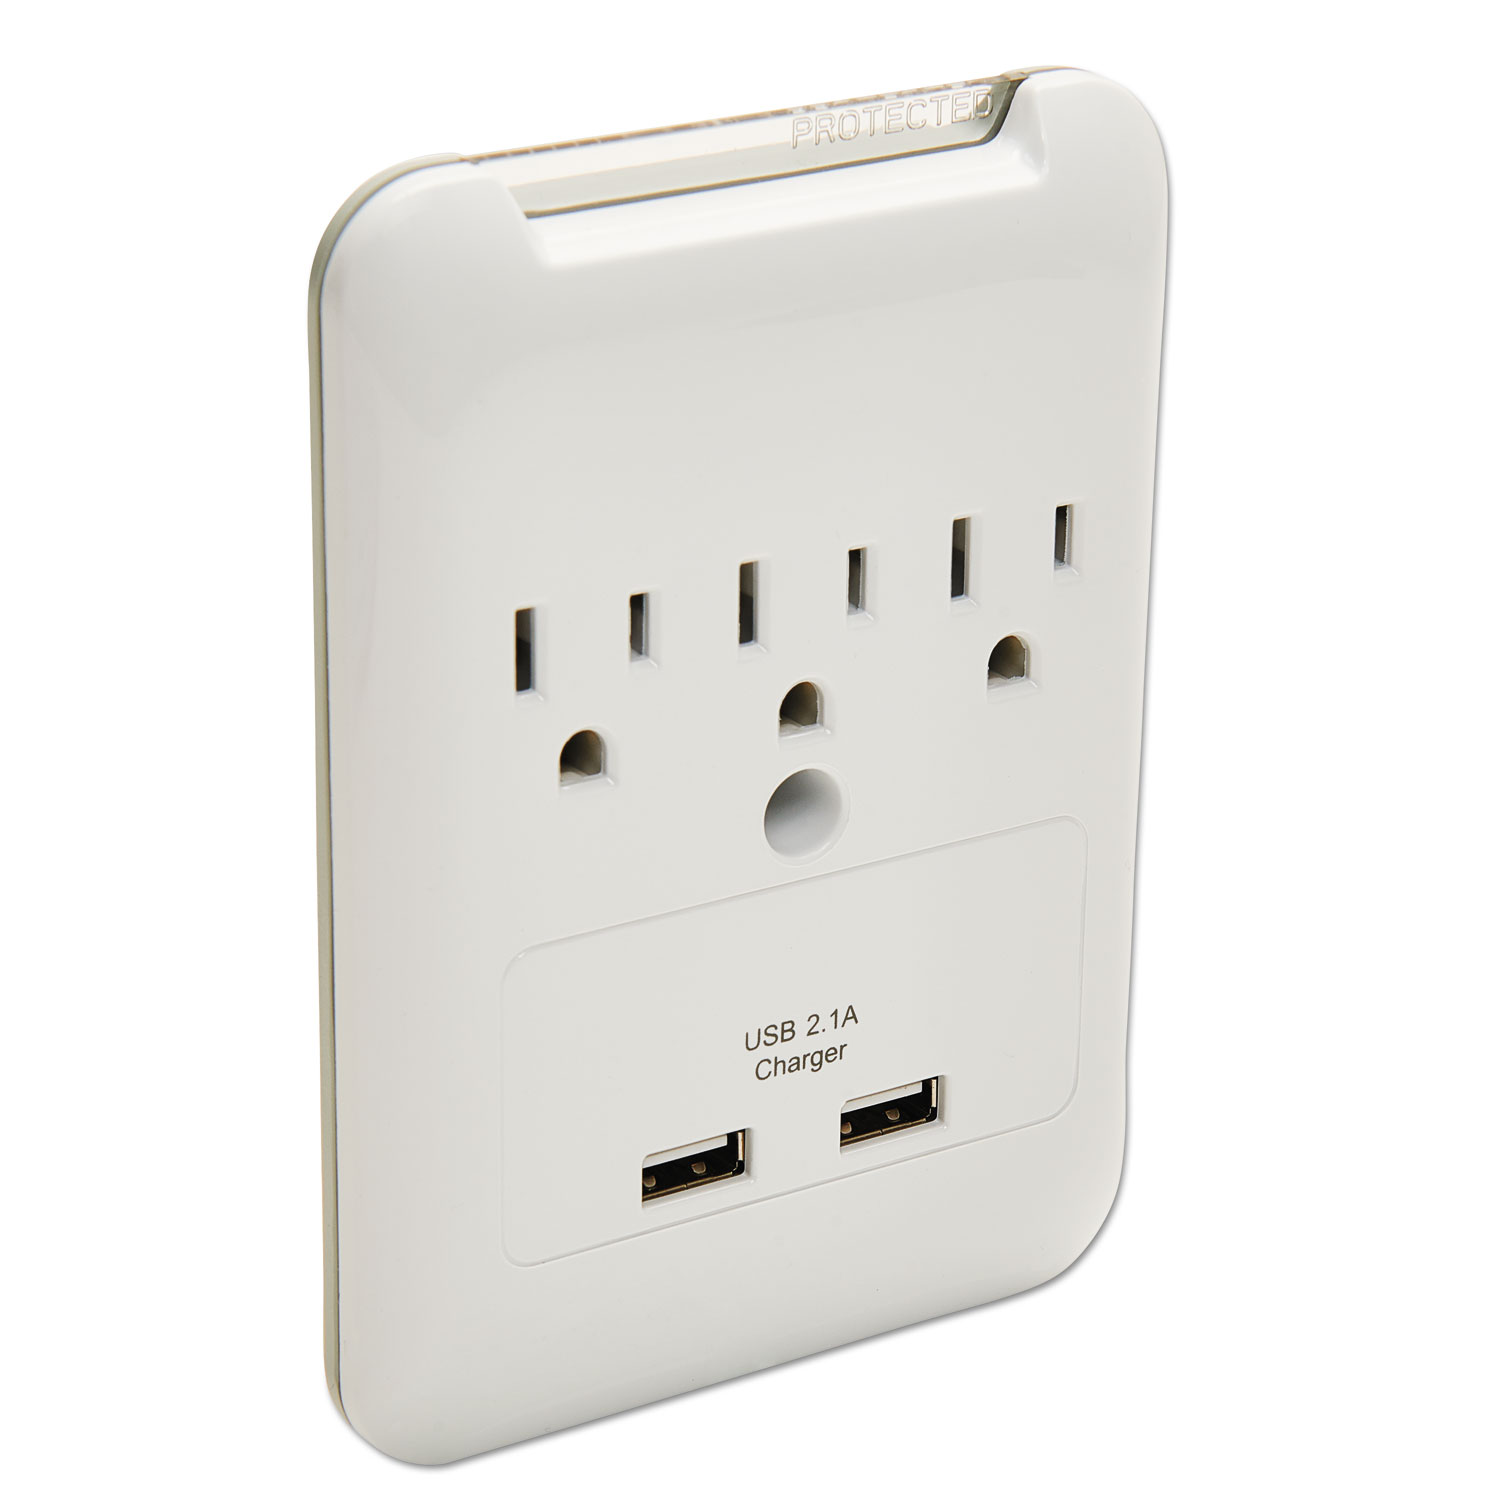  Innovera IVR71750 Wall Surge Protector, 3 Outlets/2 USB Charging Ports, 540 Joules, White (IVR71750) 